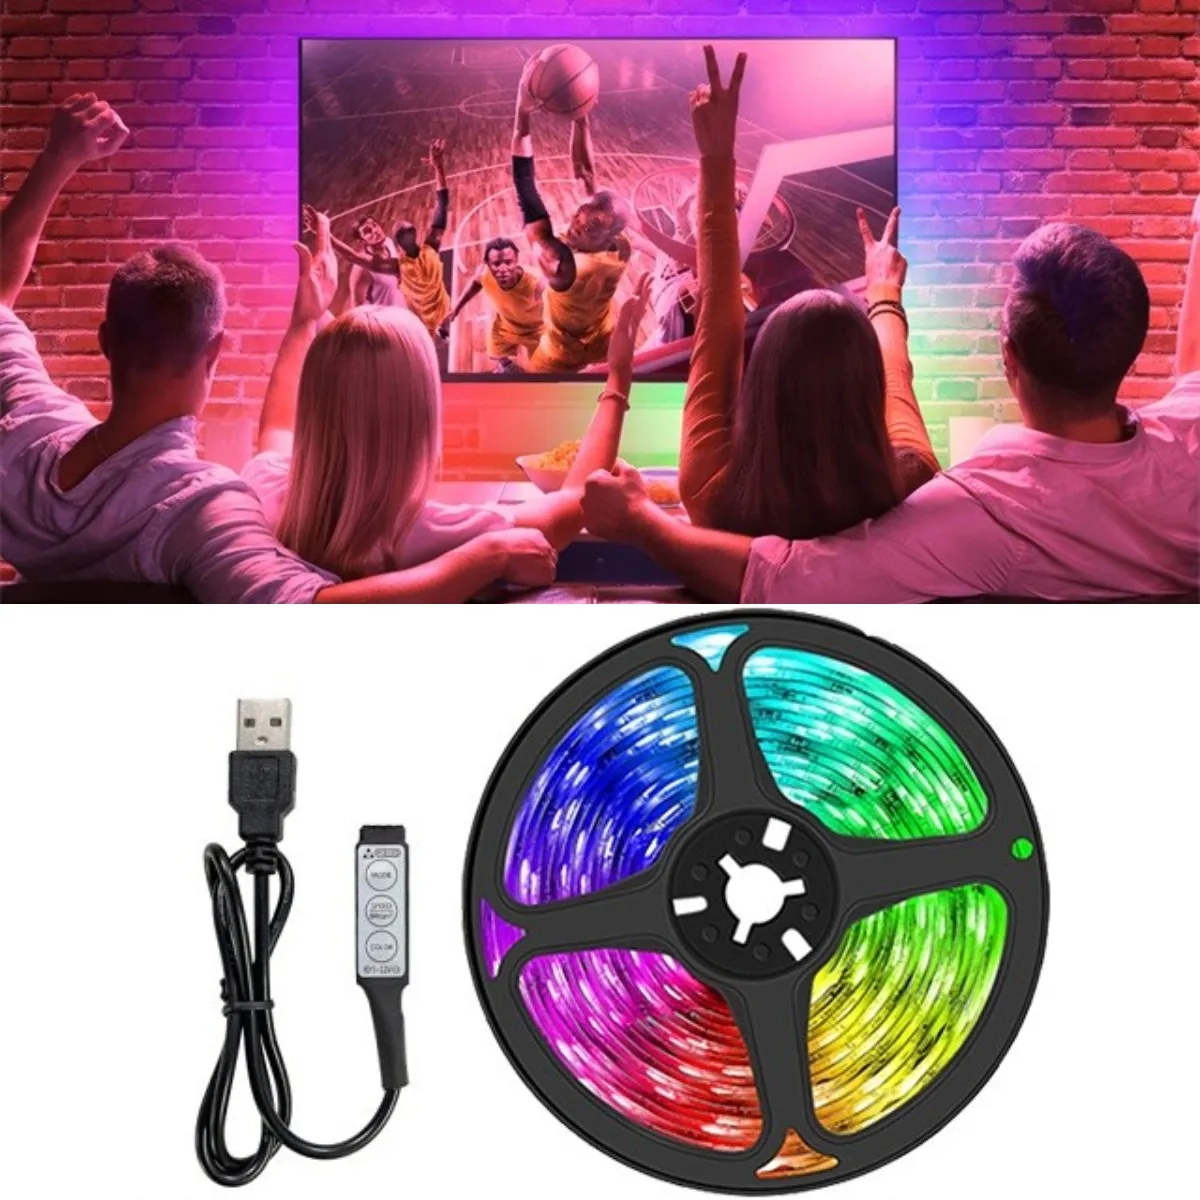 Led Strip Lights 5V Rgb 5050 Bluetooth Control Waterproof Flexible For Tv Backlit Room Home Party Outdoor Decoration